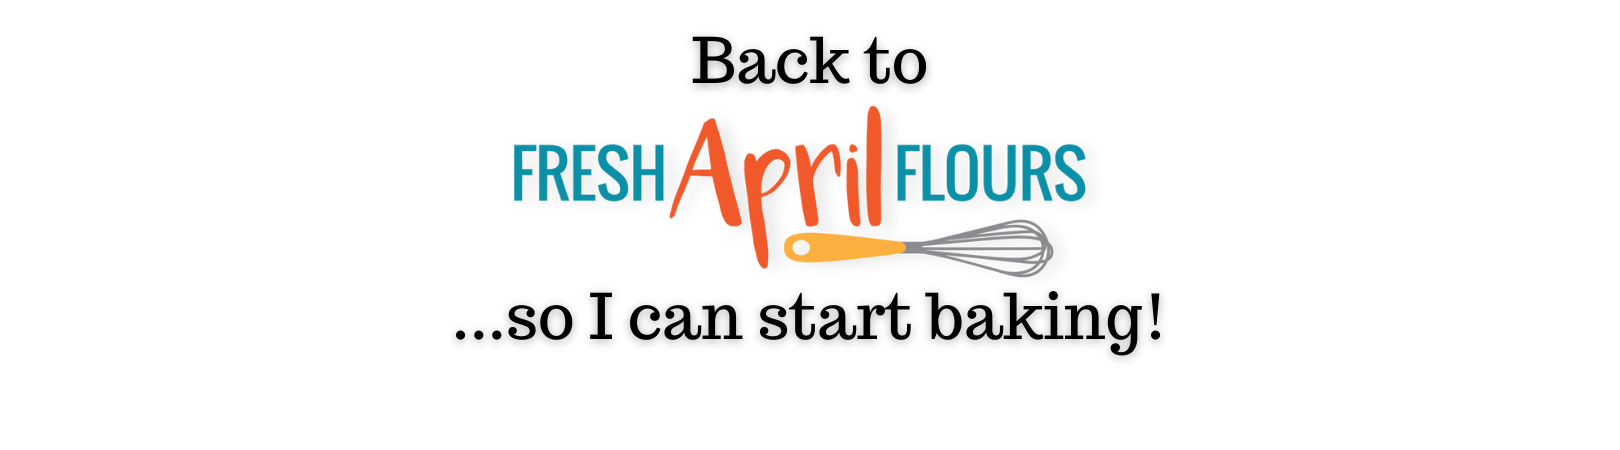 text image that says back to fresh april flours so i can start baking